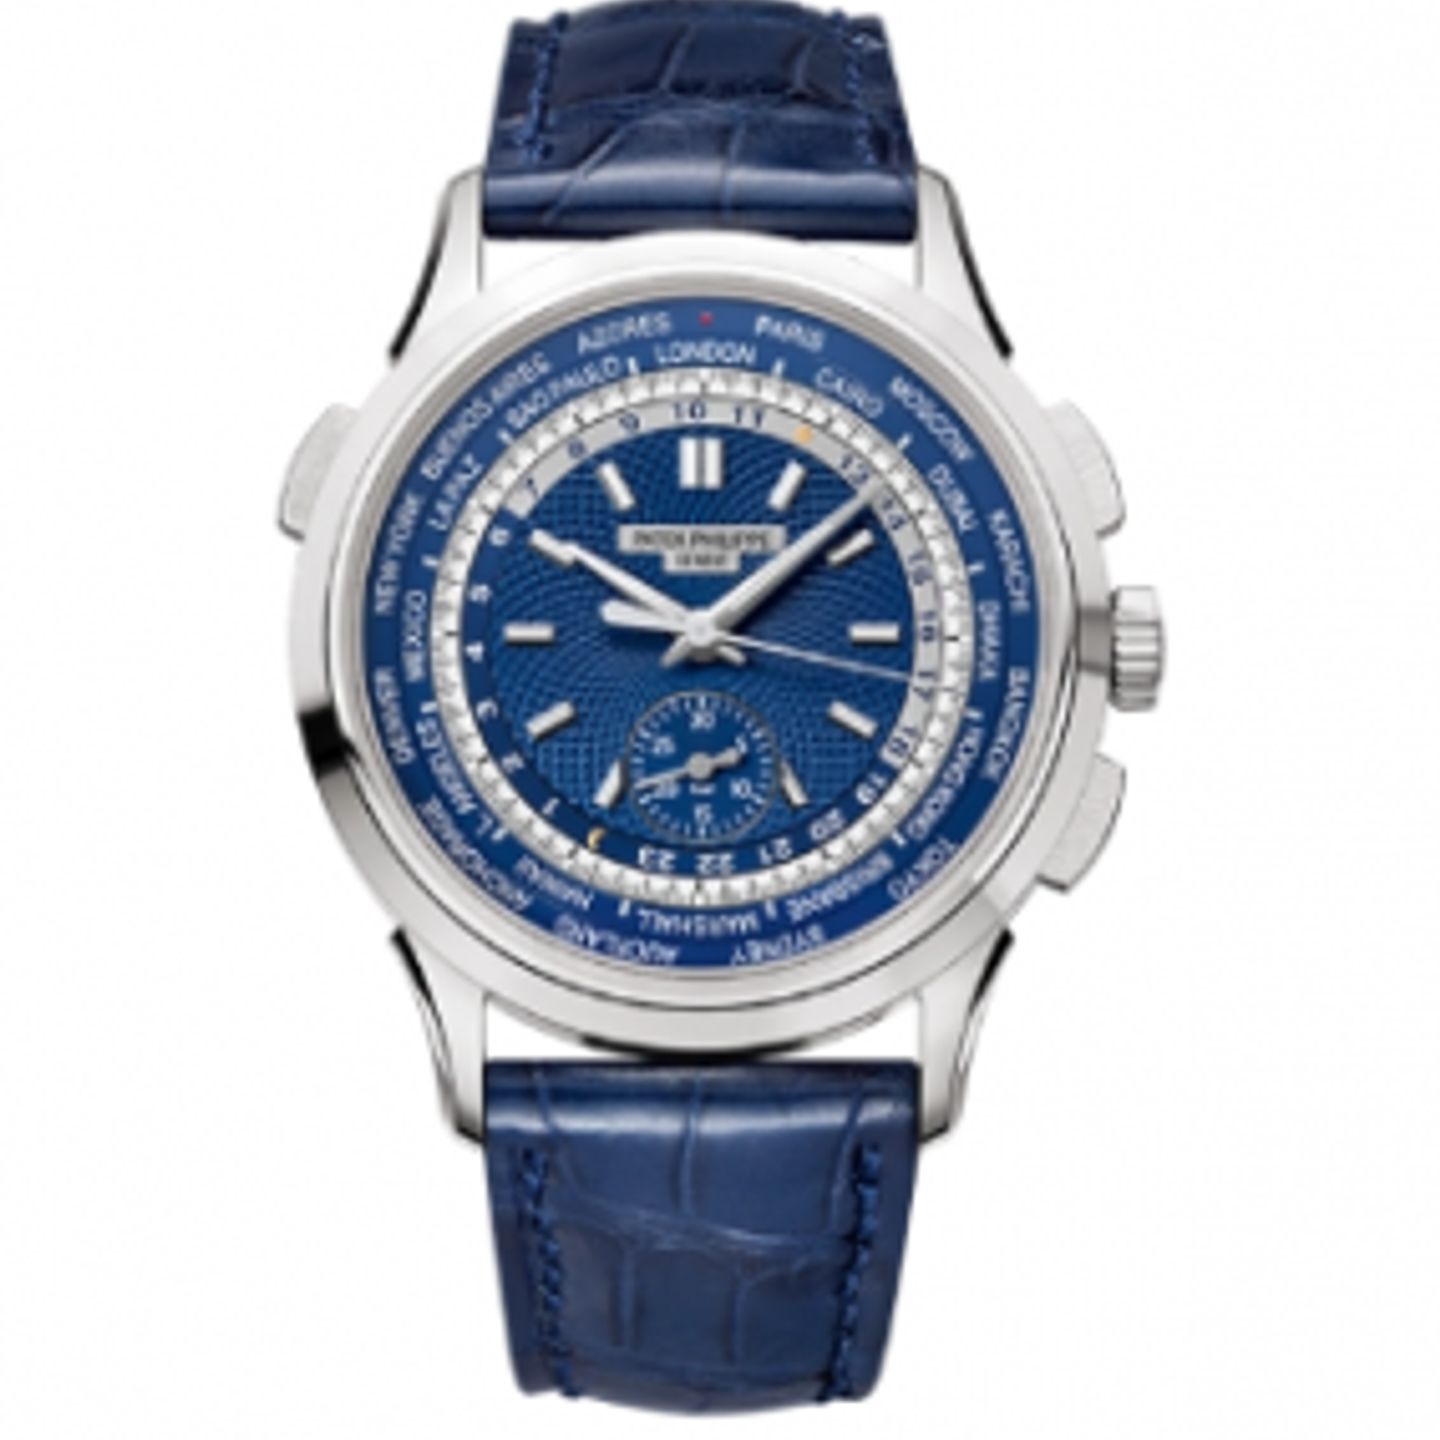 Patek Philippe World Time Chronograph 5930G-001 (Unknown (random serial)) - Blue dial 39 mm White Gold case (1/1)